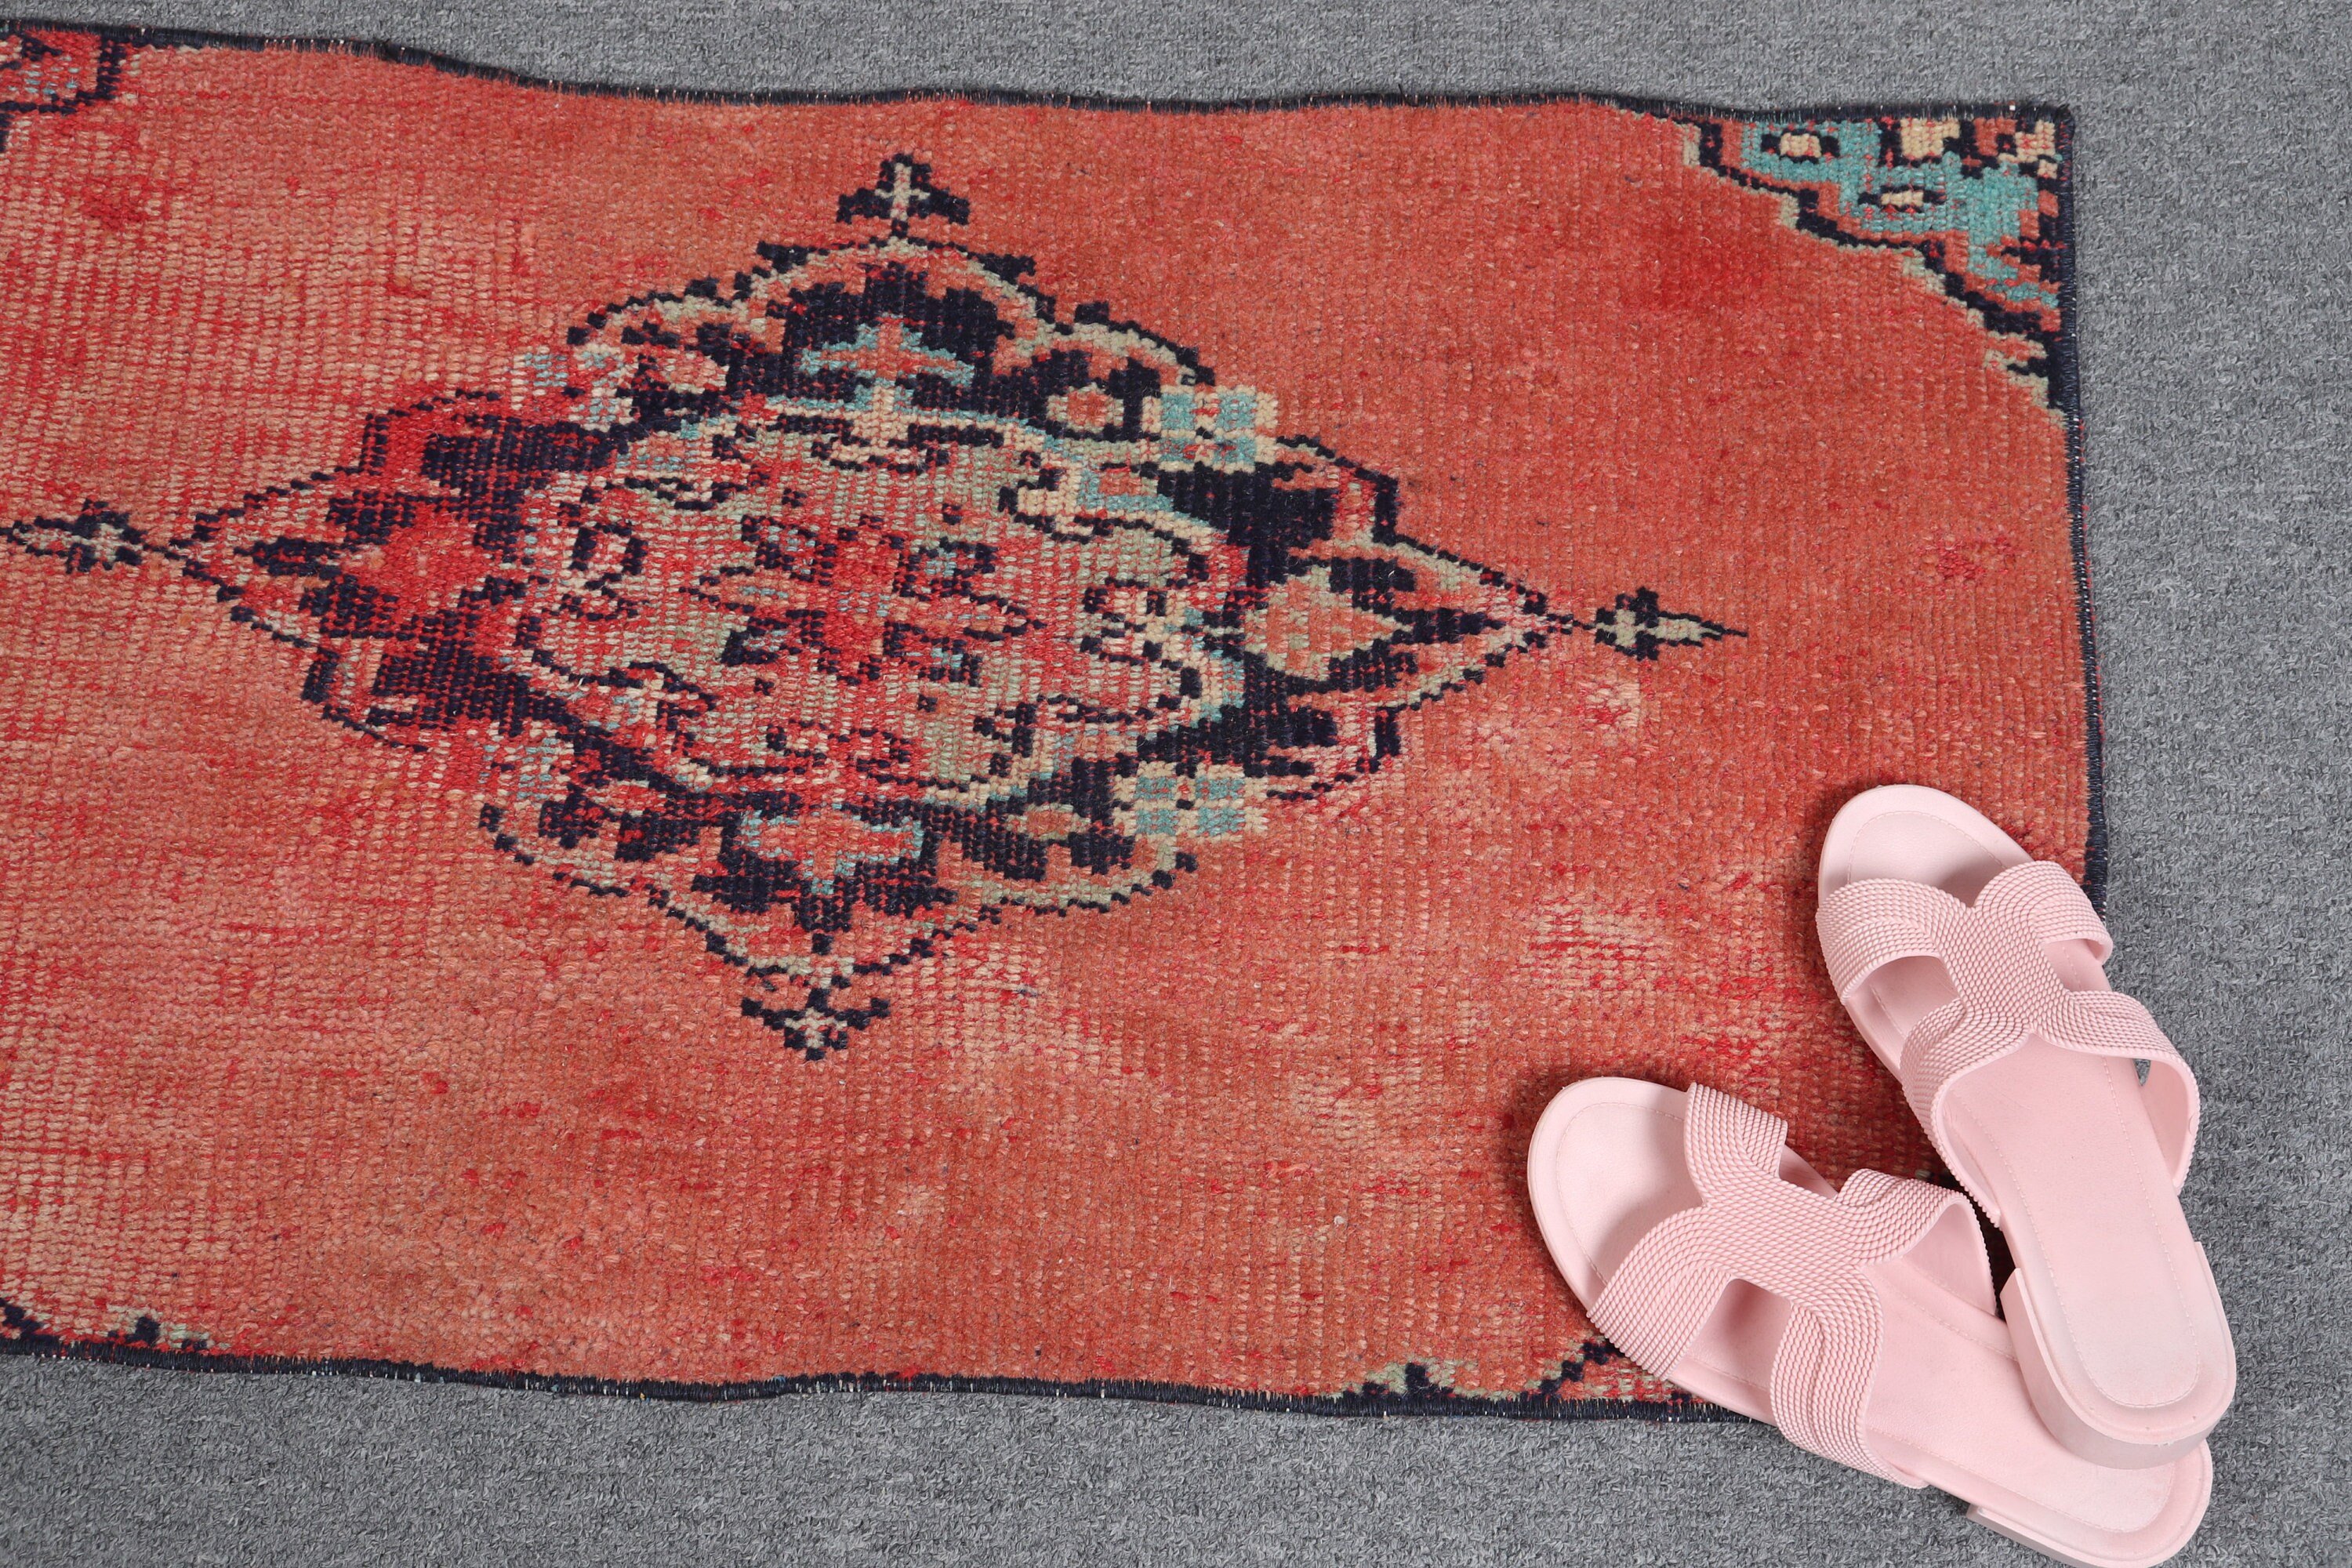 Pale Rugs, Bedroom Rug, 1.6x2.9 ft Small Rugs, Car Mat Rug, Rugs for Car Mat, Turkish Rugs, Red Anatolian Rug, Vintage Rug, Home Decor Rugs